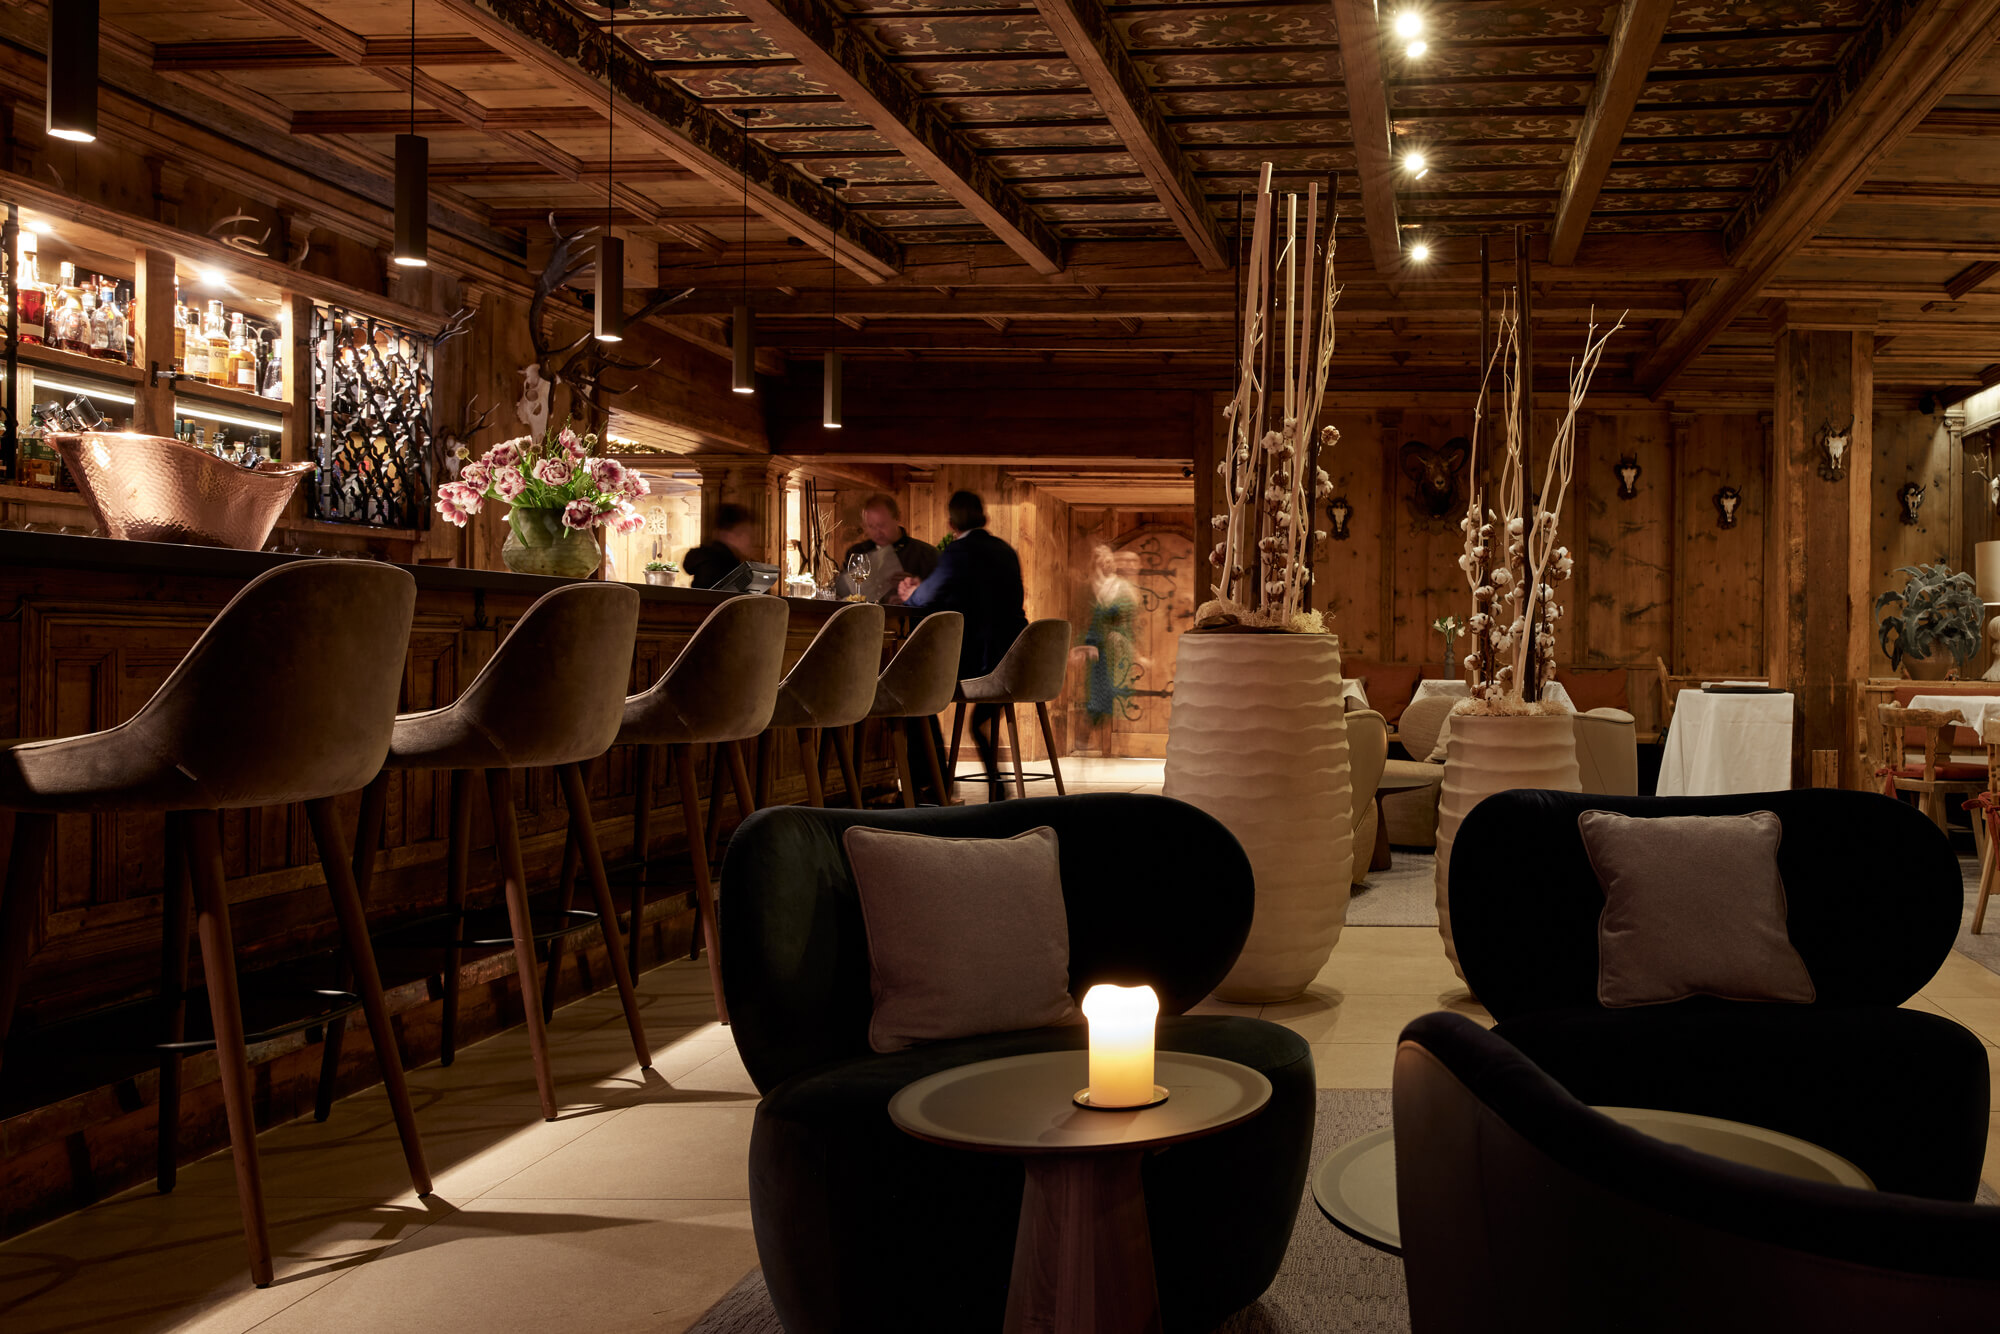 A room with chairs and tables in TOP Hotel Hochgurgl, a place for good drinks and conversations. The